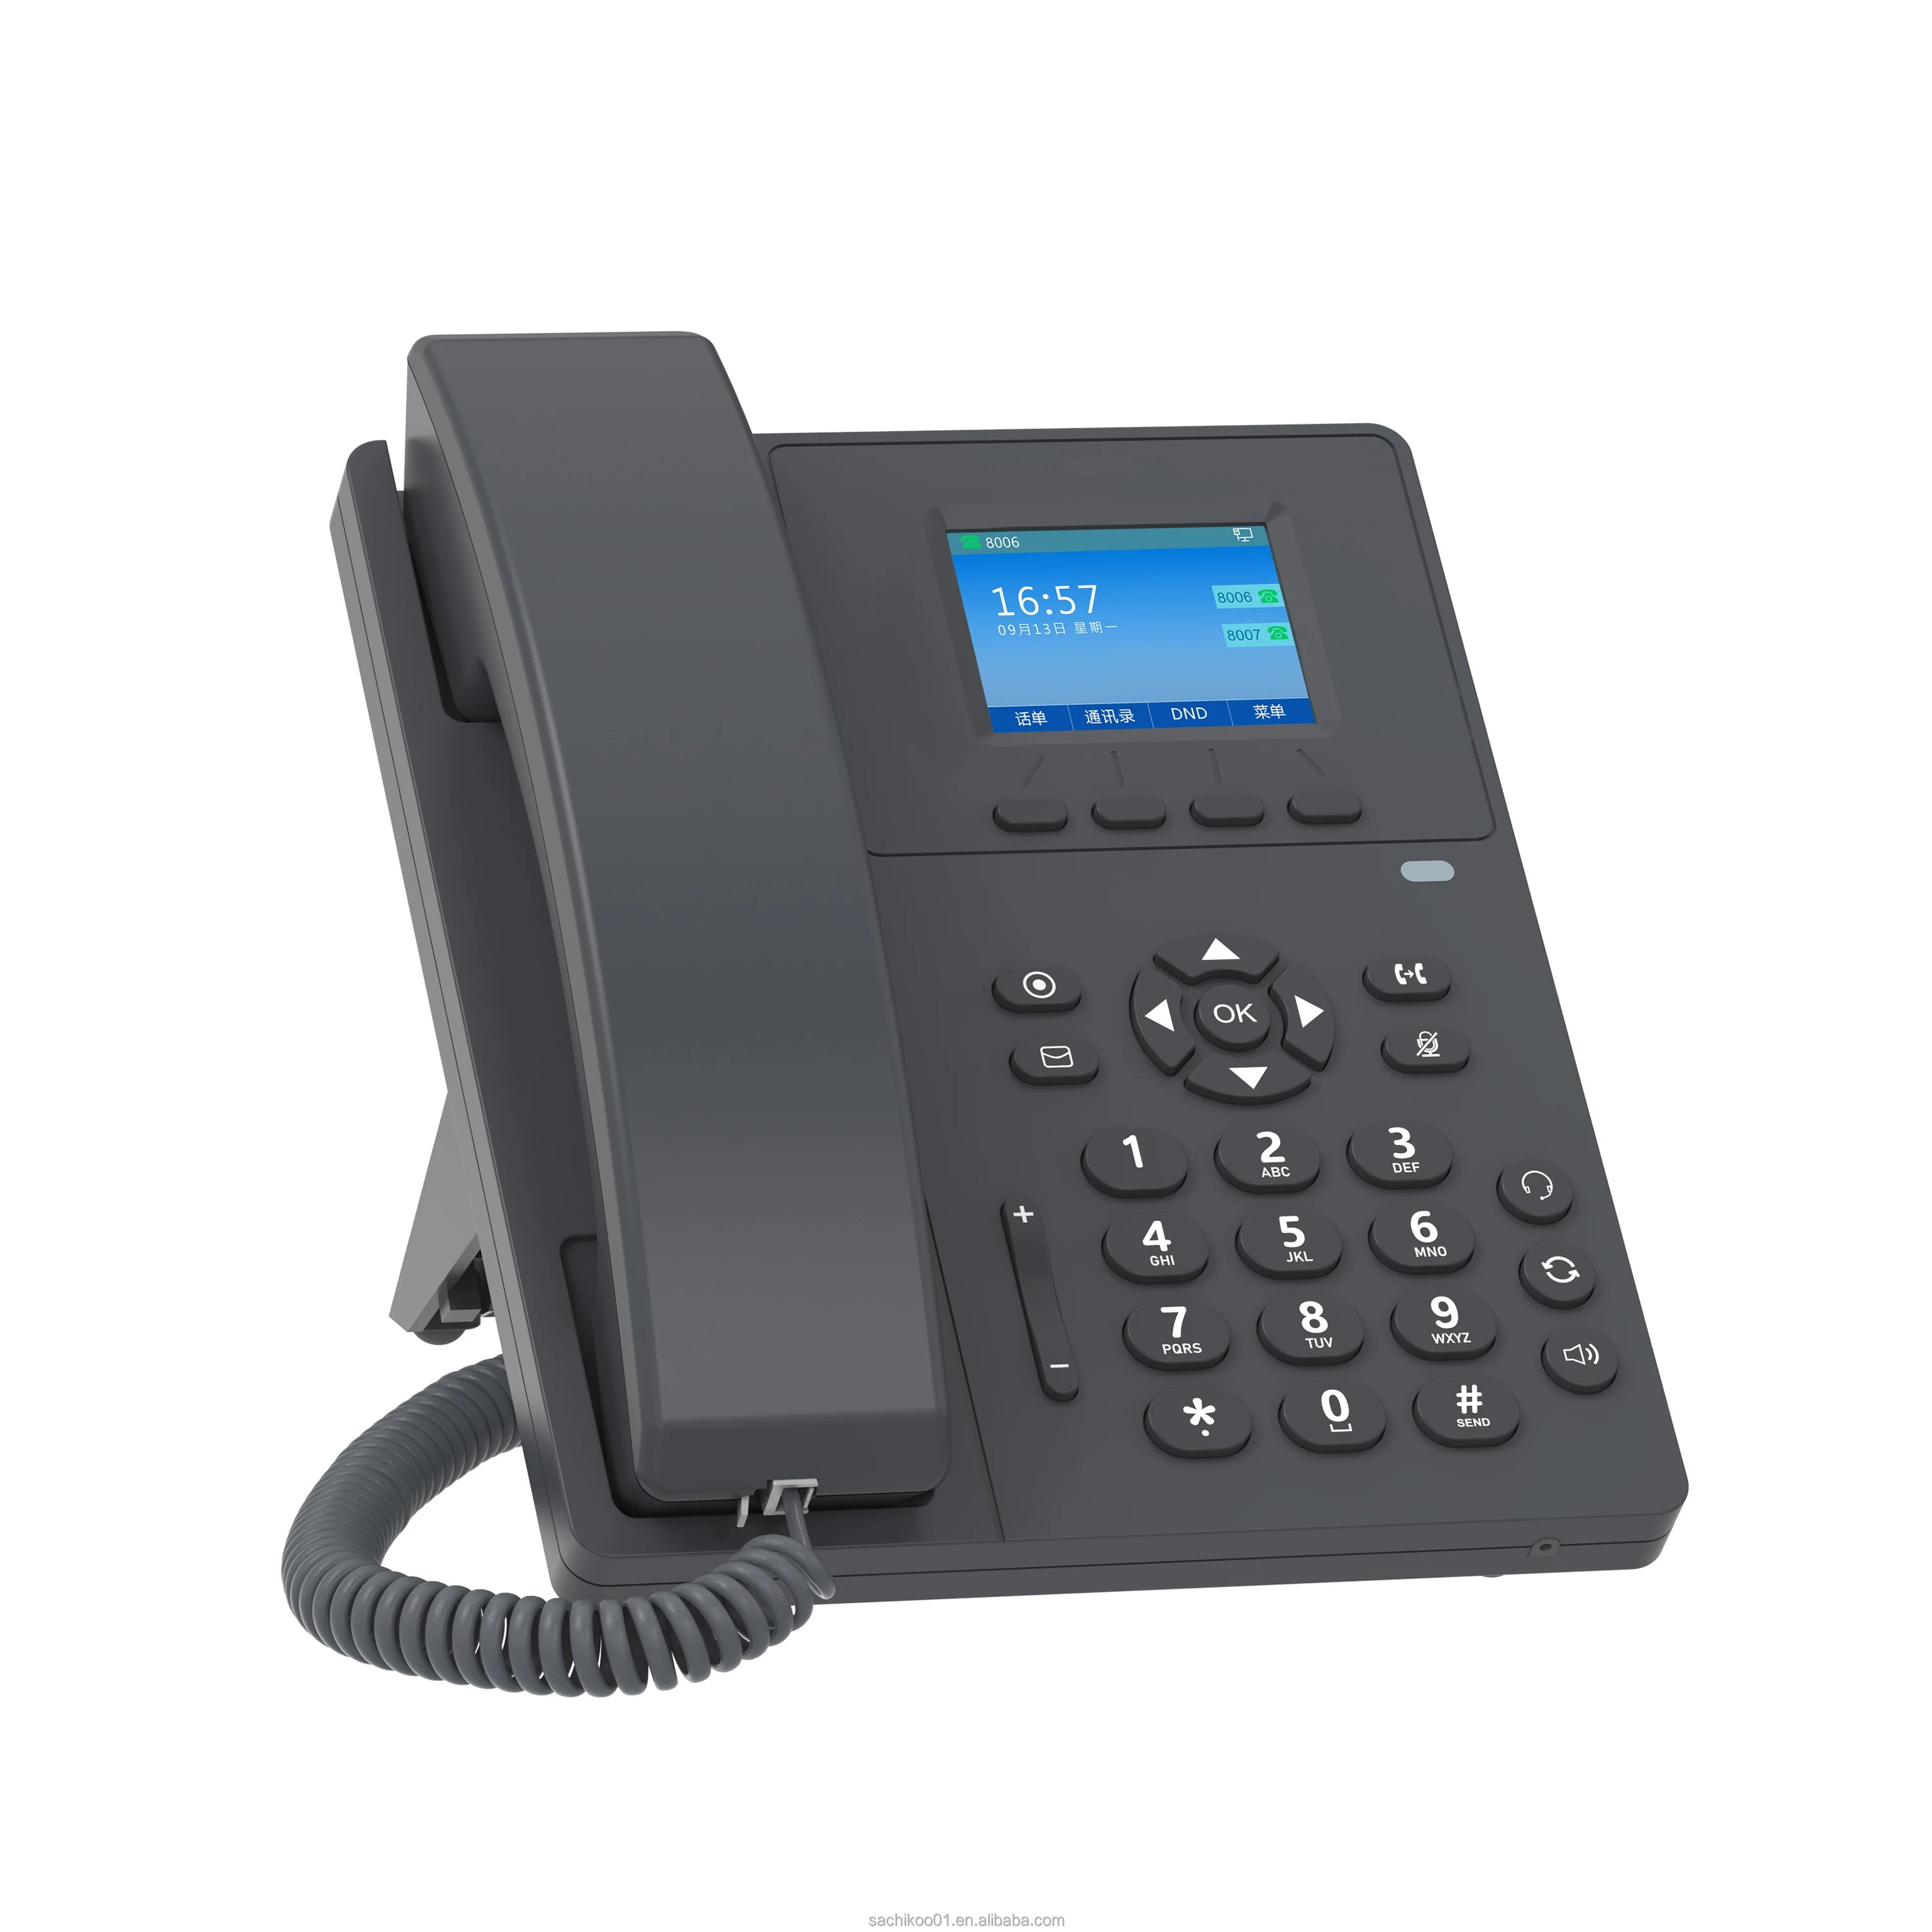 V110 IP Phone 2.4 inch Color Backlit Color Screen Support HD Handset/Speaker VoIP Phone with POE Power Adapter